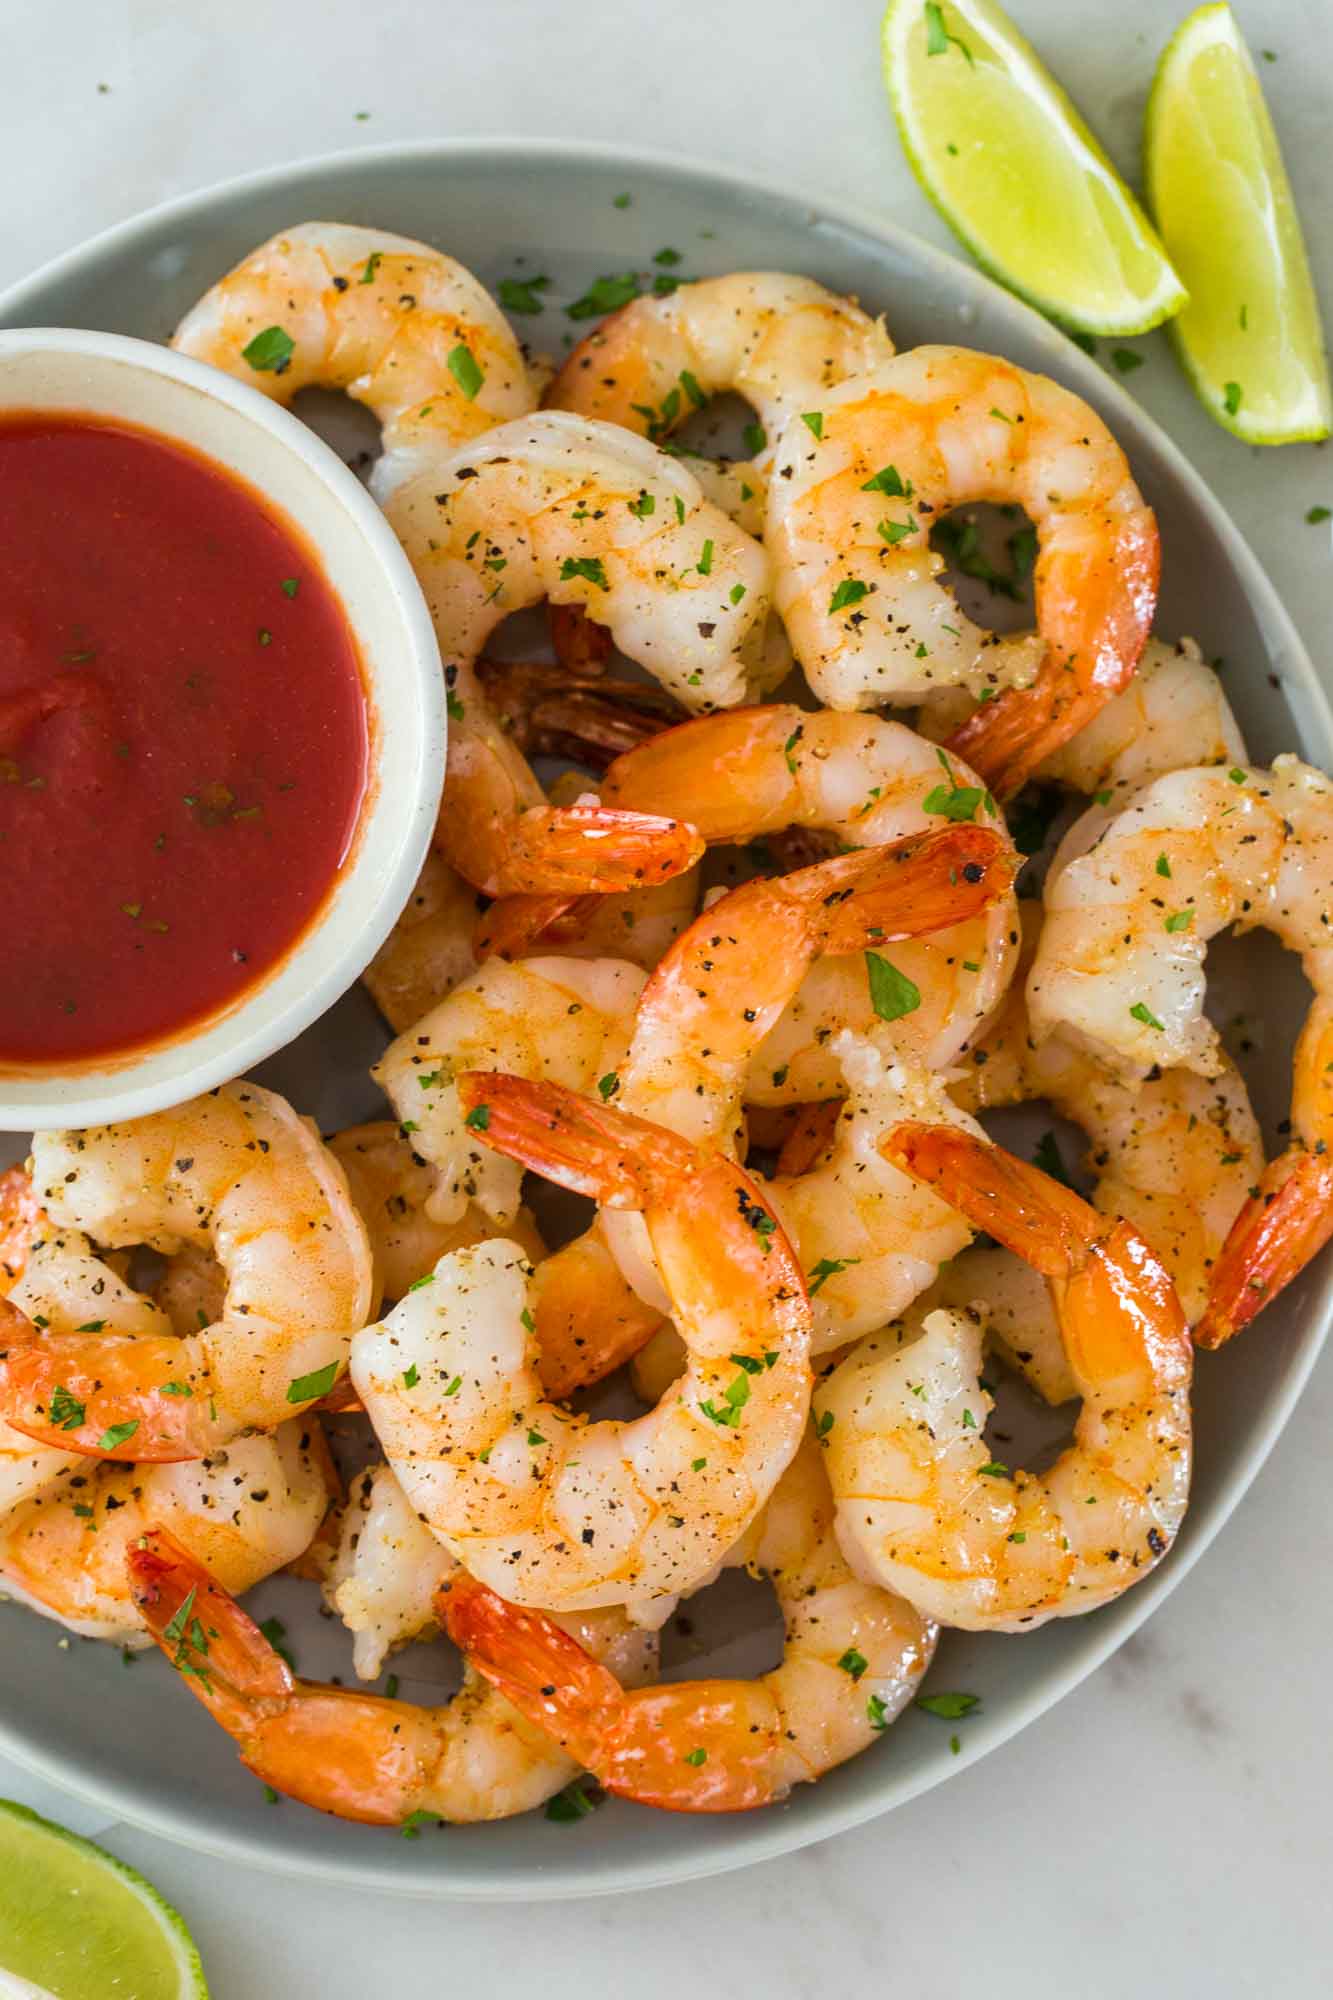 Overhead shot of perfectly cooked shrimp on a plate with a dip on the side, and wedges of lime